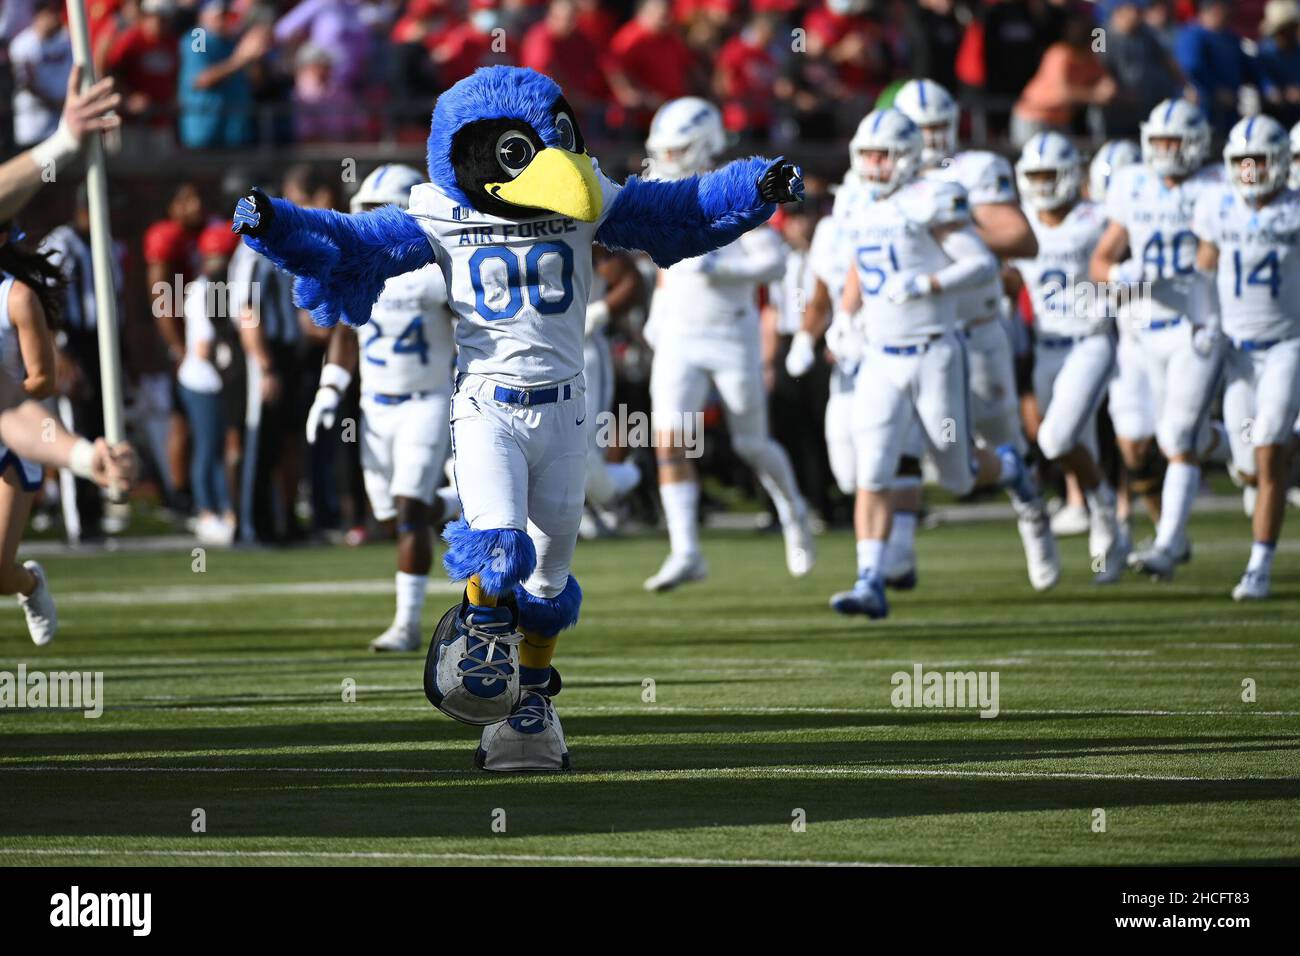 Dallas, Texas, USA. December 28, 2021: Air Force Falcons Mascot The Bird running with the team during the ServPro First Responder bowl game between The United States Air Force Academy and the University of Louisville Cardinals at Gerald J. Ford Stadium in Dallas, TX. Air Force leads the first half against Louisville, 28-14. Patrick Green/CSM Credit: Cal Sport Media/Alamy Live News Stock Photo